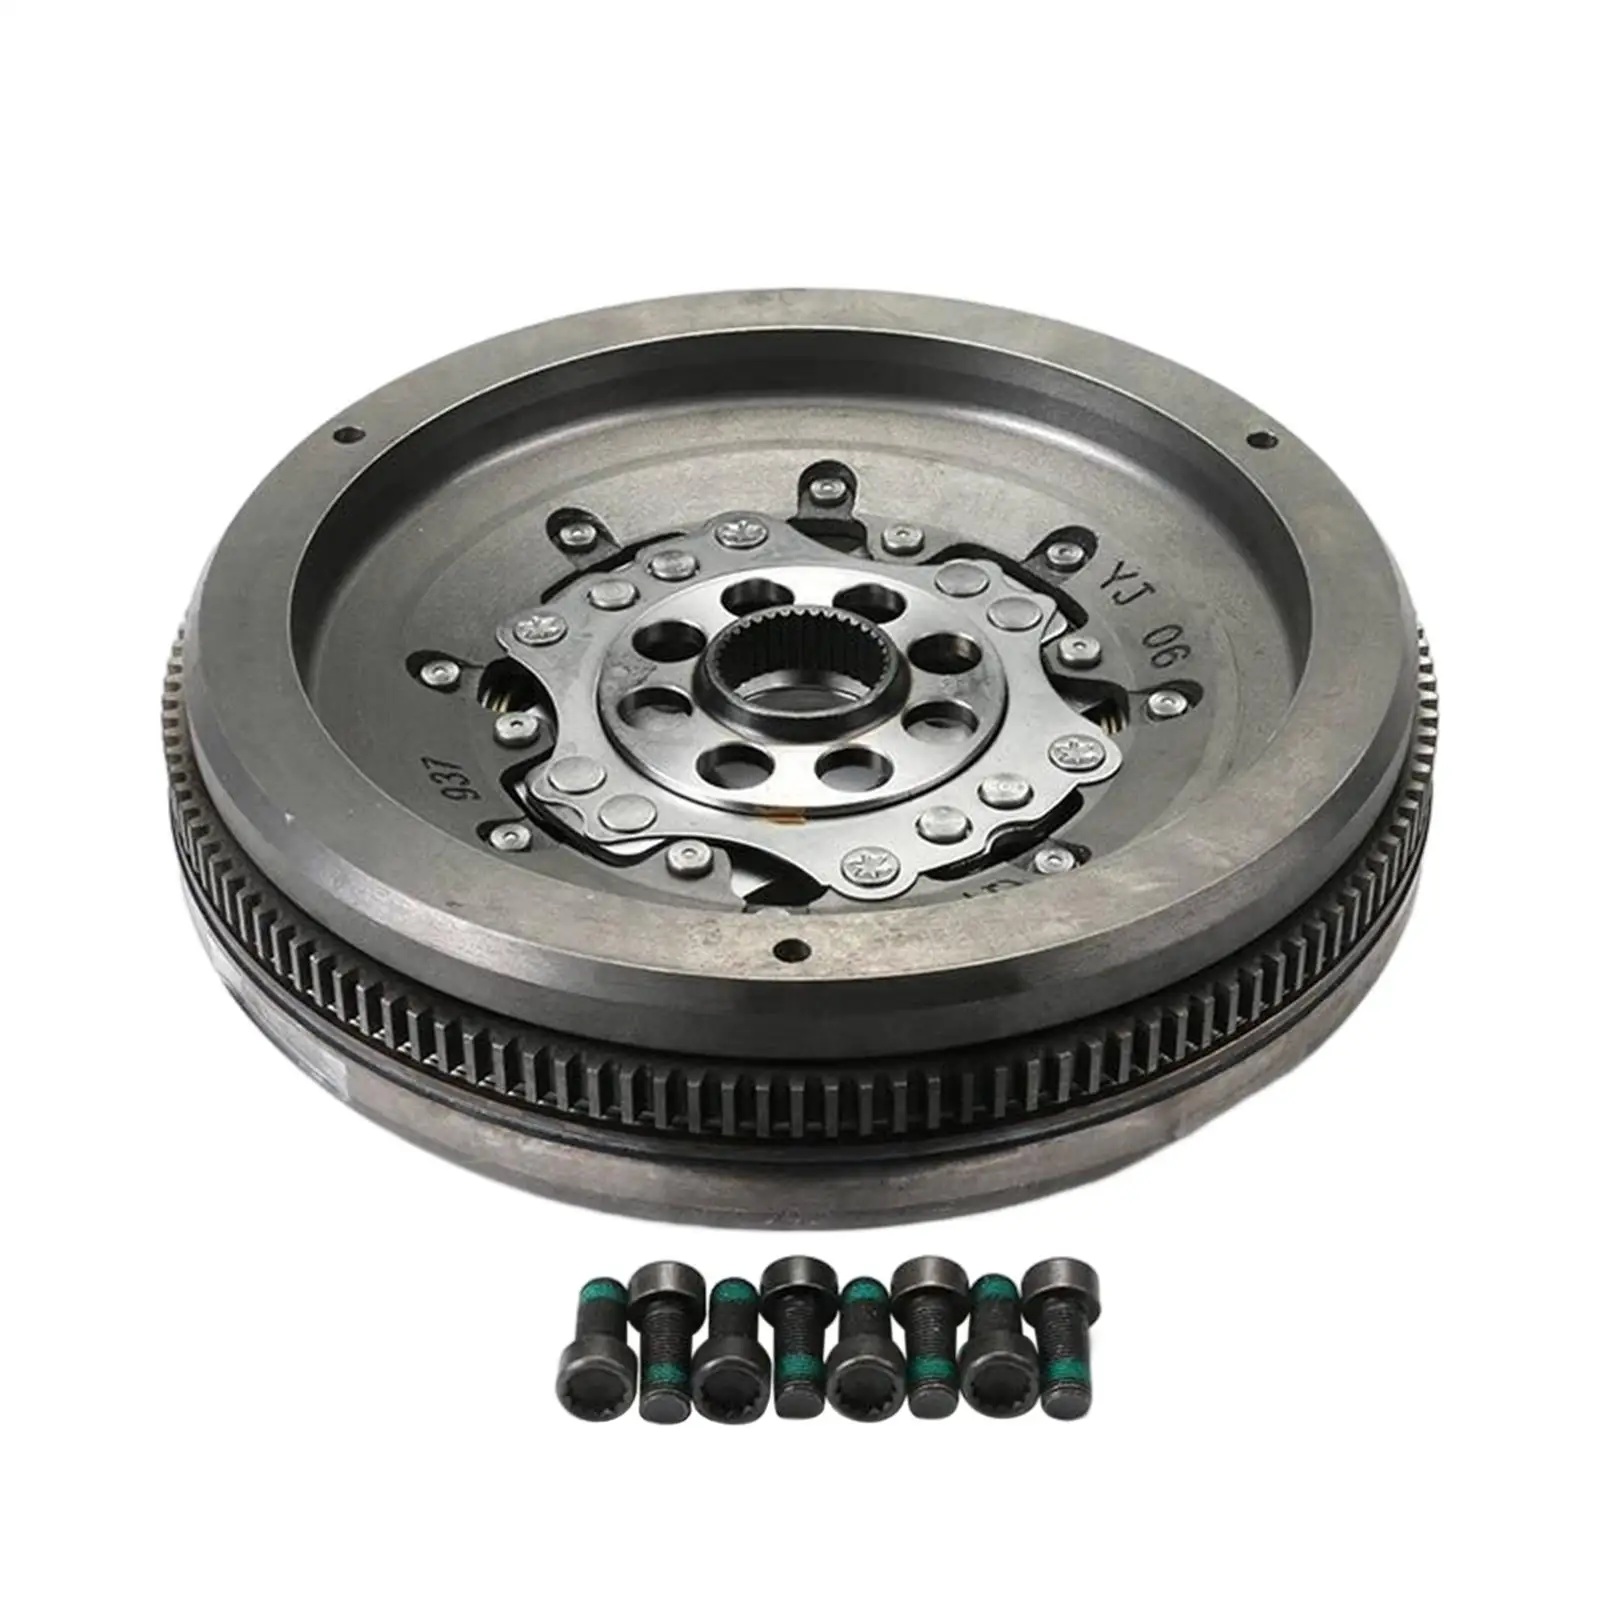 Vehicle Transmission Clutch Flywheel 02E Dq250 02E398029B 132 Teeth 8 Holes 02E398029C for VW Replace Parts Durable